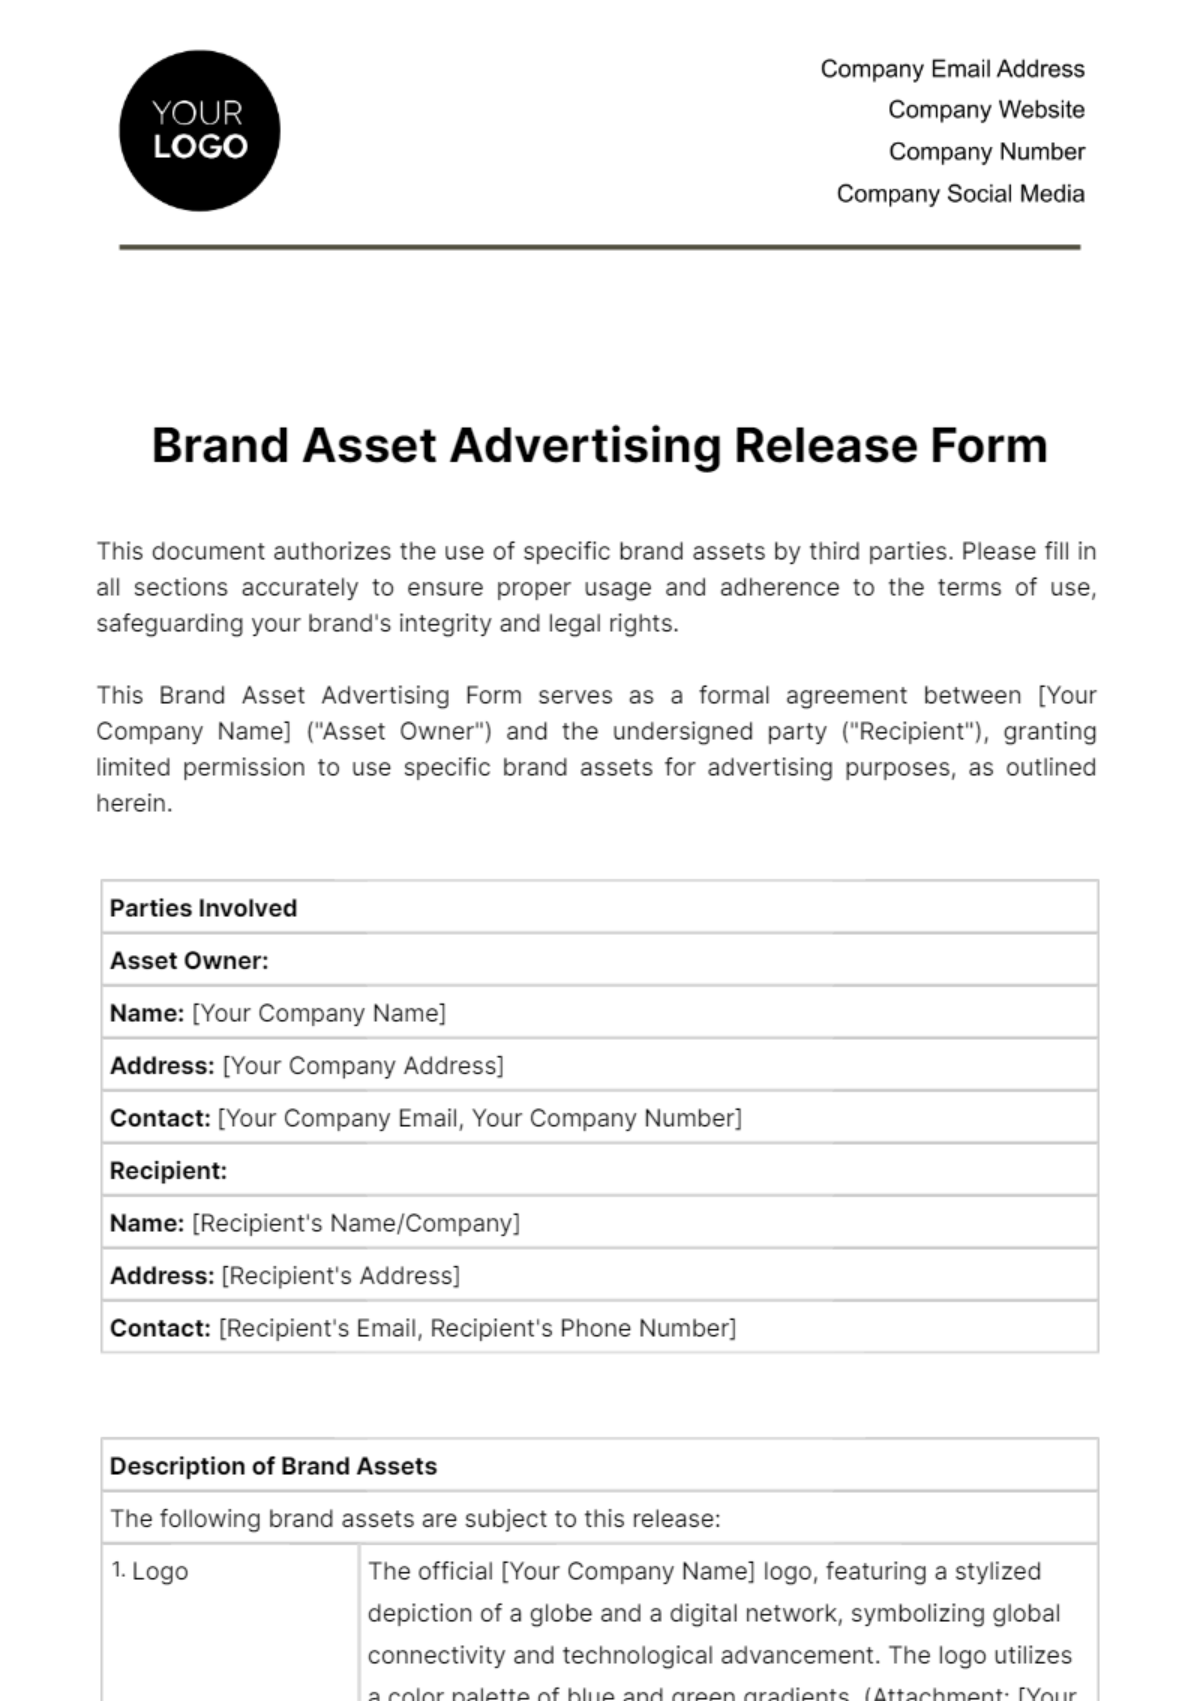 Free Brand Asset Advertising Release Form Template